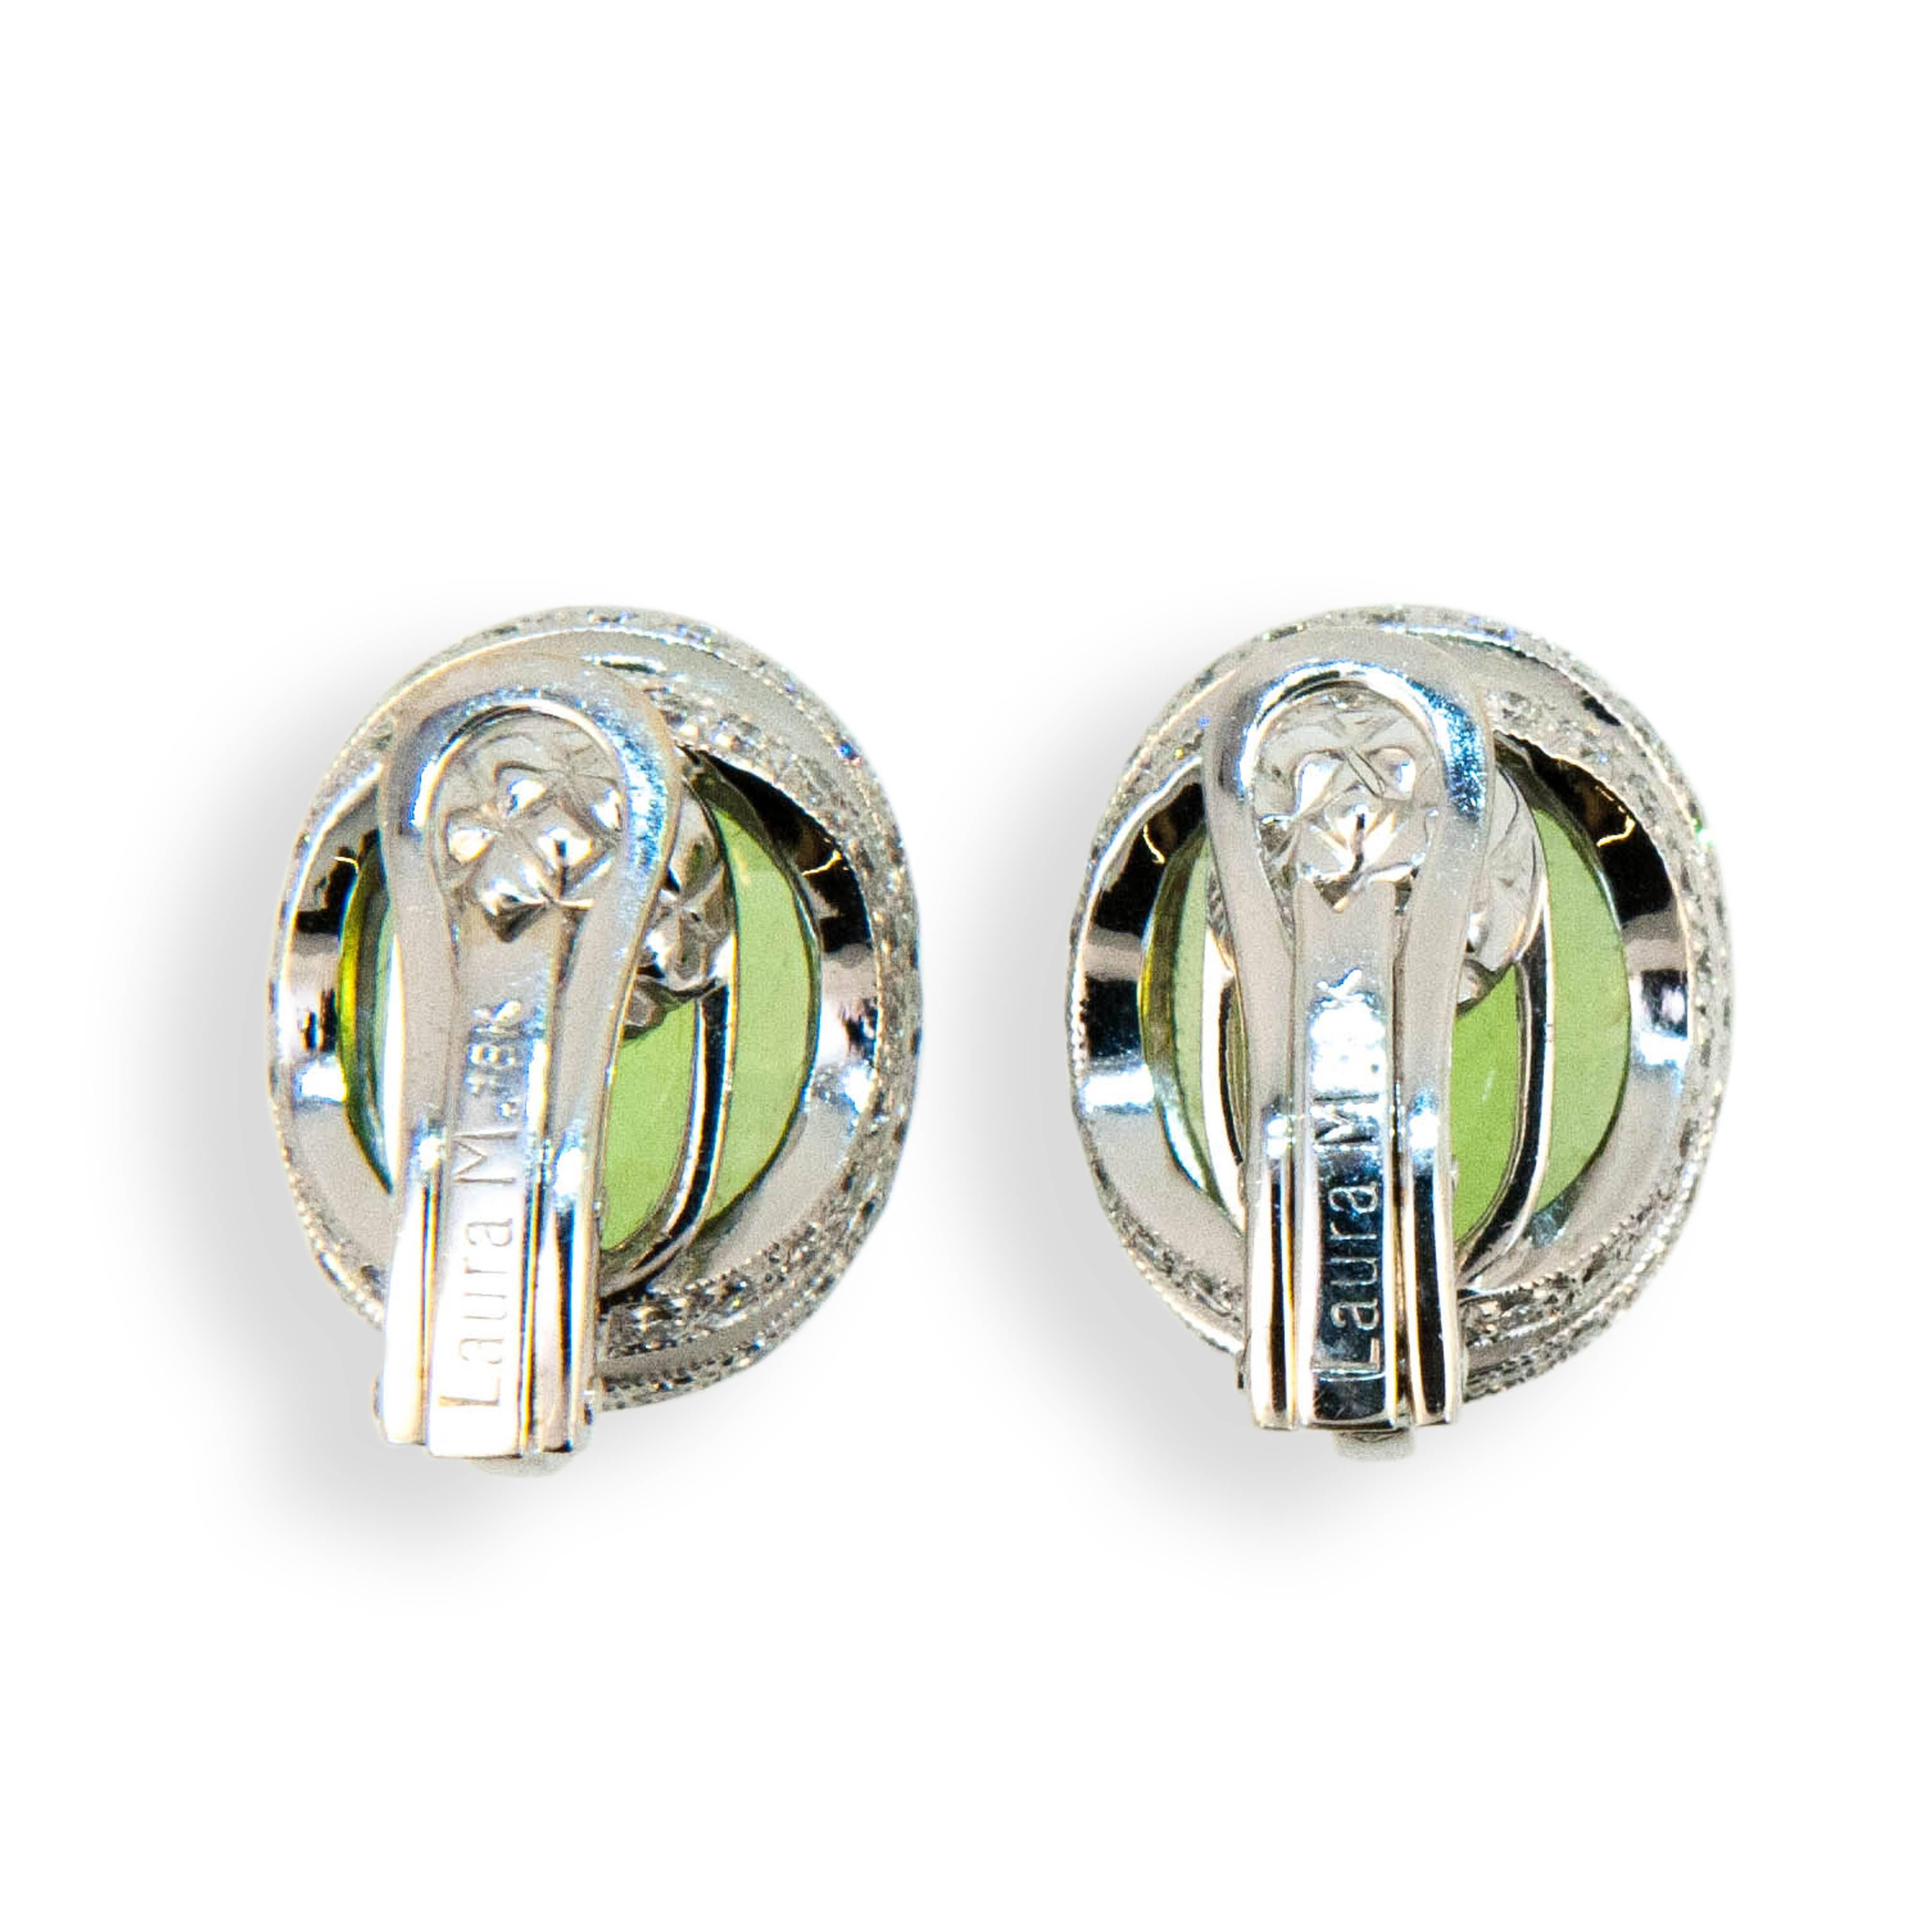 18 karat white gold oval checker cut peridot earrings with diamonds. Peridot are 8.65 carats total weight and diamonds 1.20 carats total weight. Earrings are clip on, posts could be added.